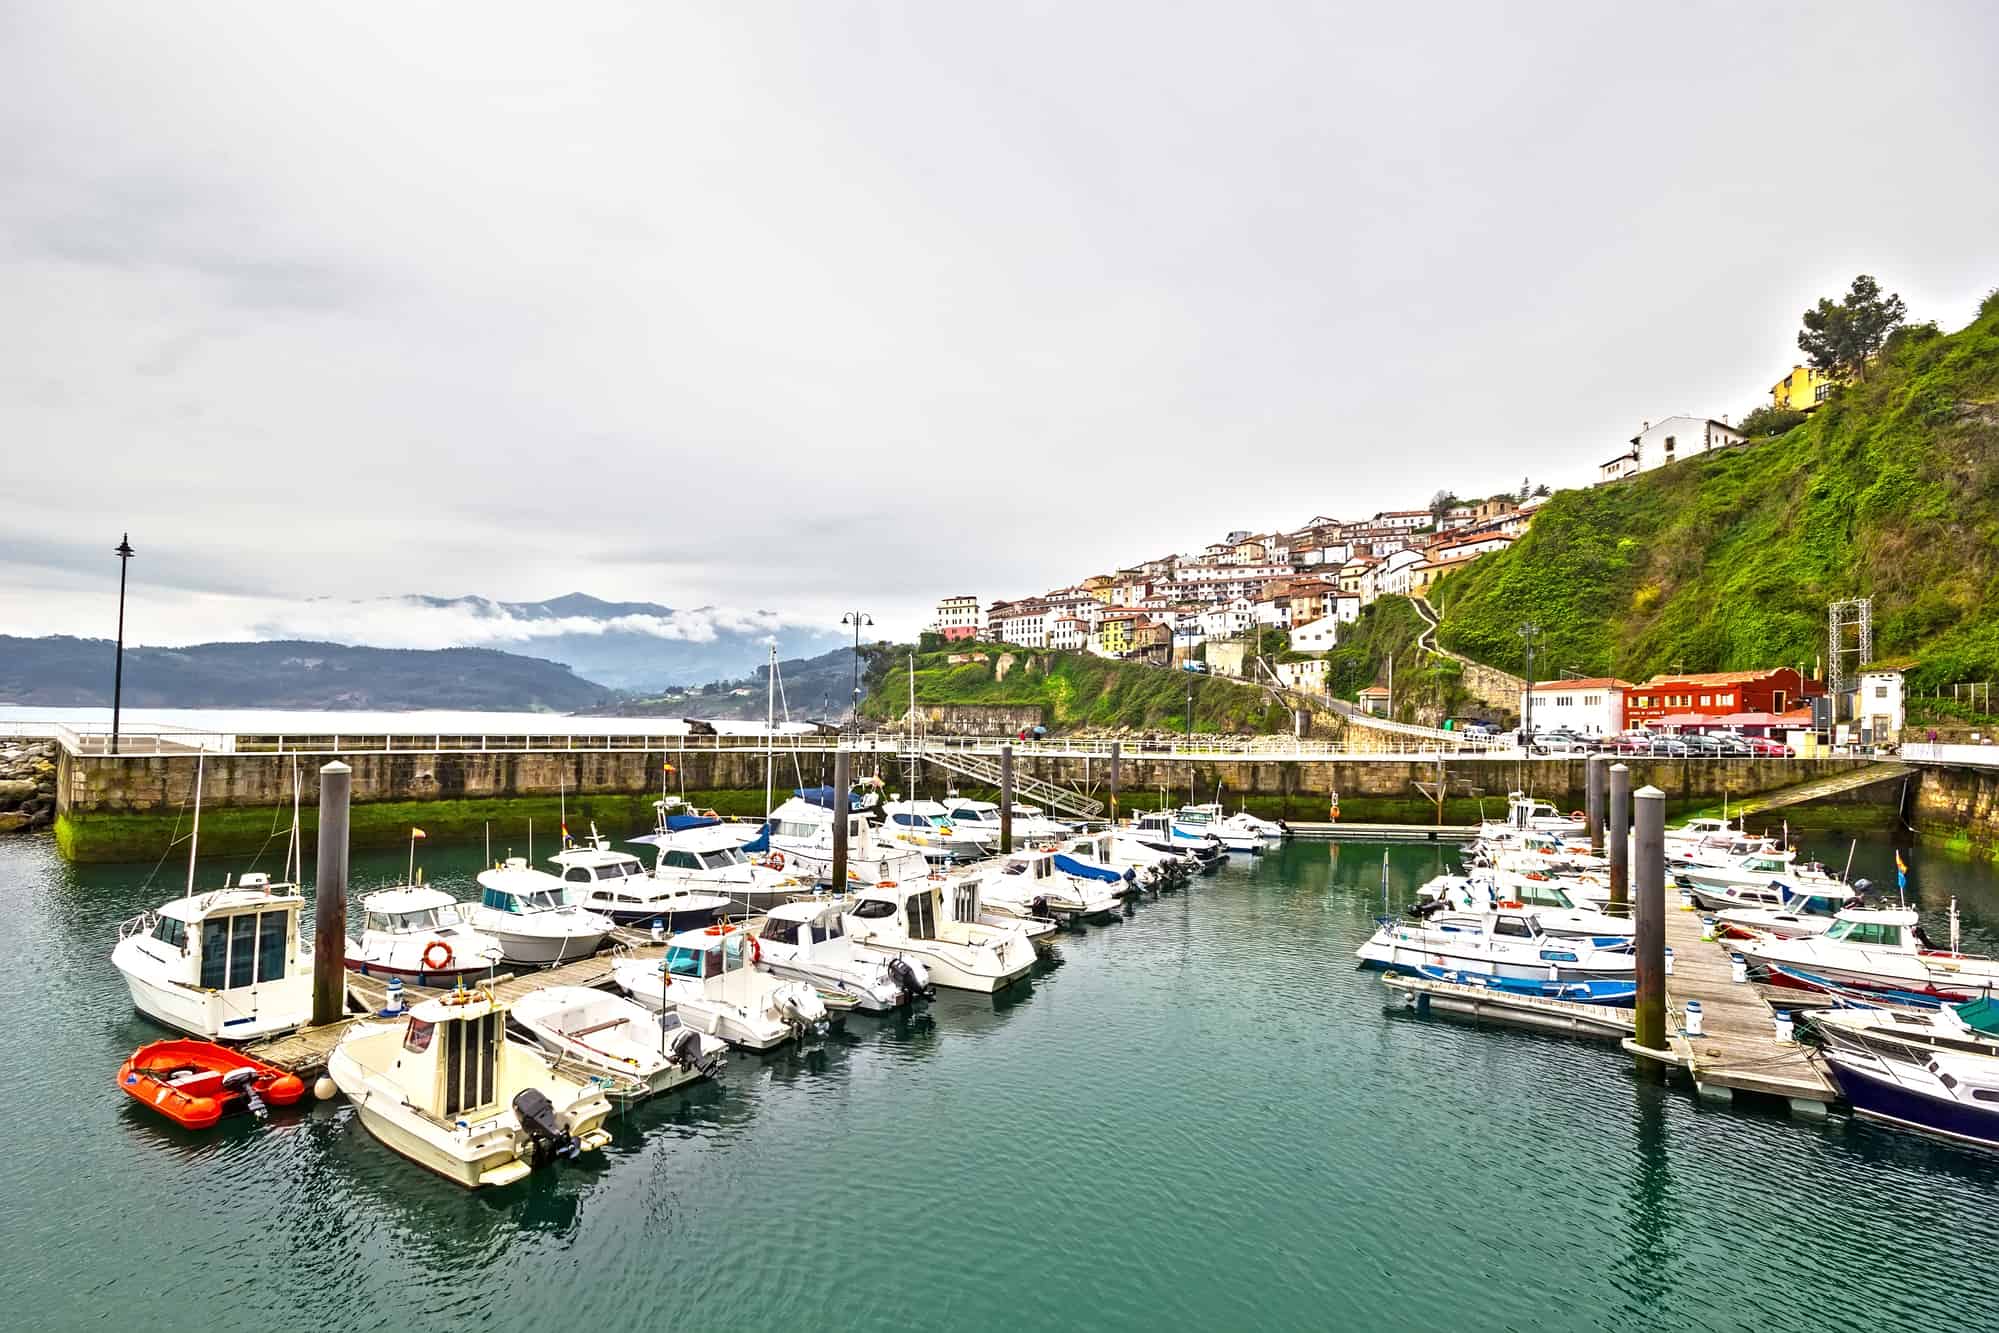 View of Lastres from harbor. It is one of the most beautiful villages in Spain